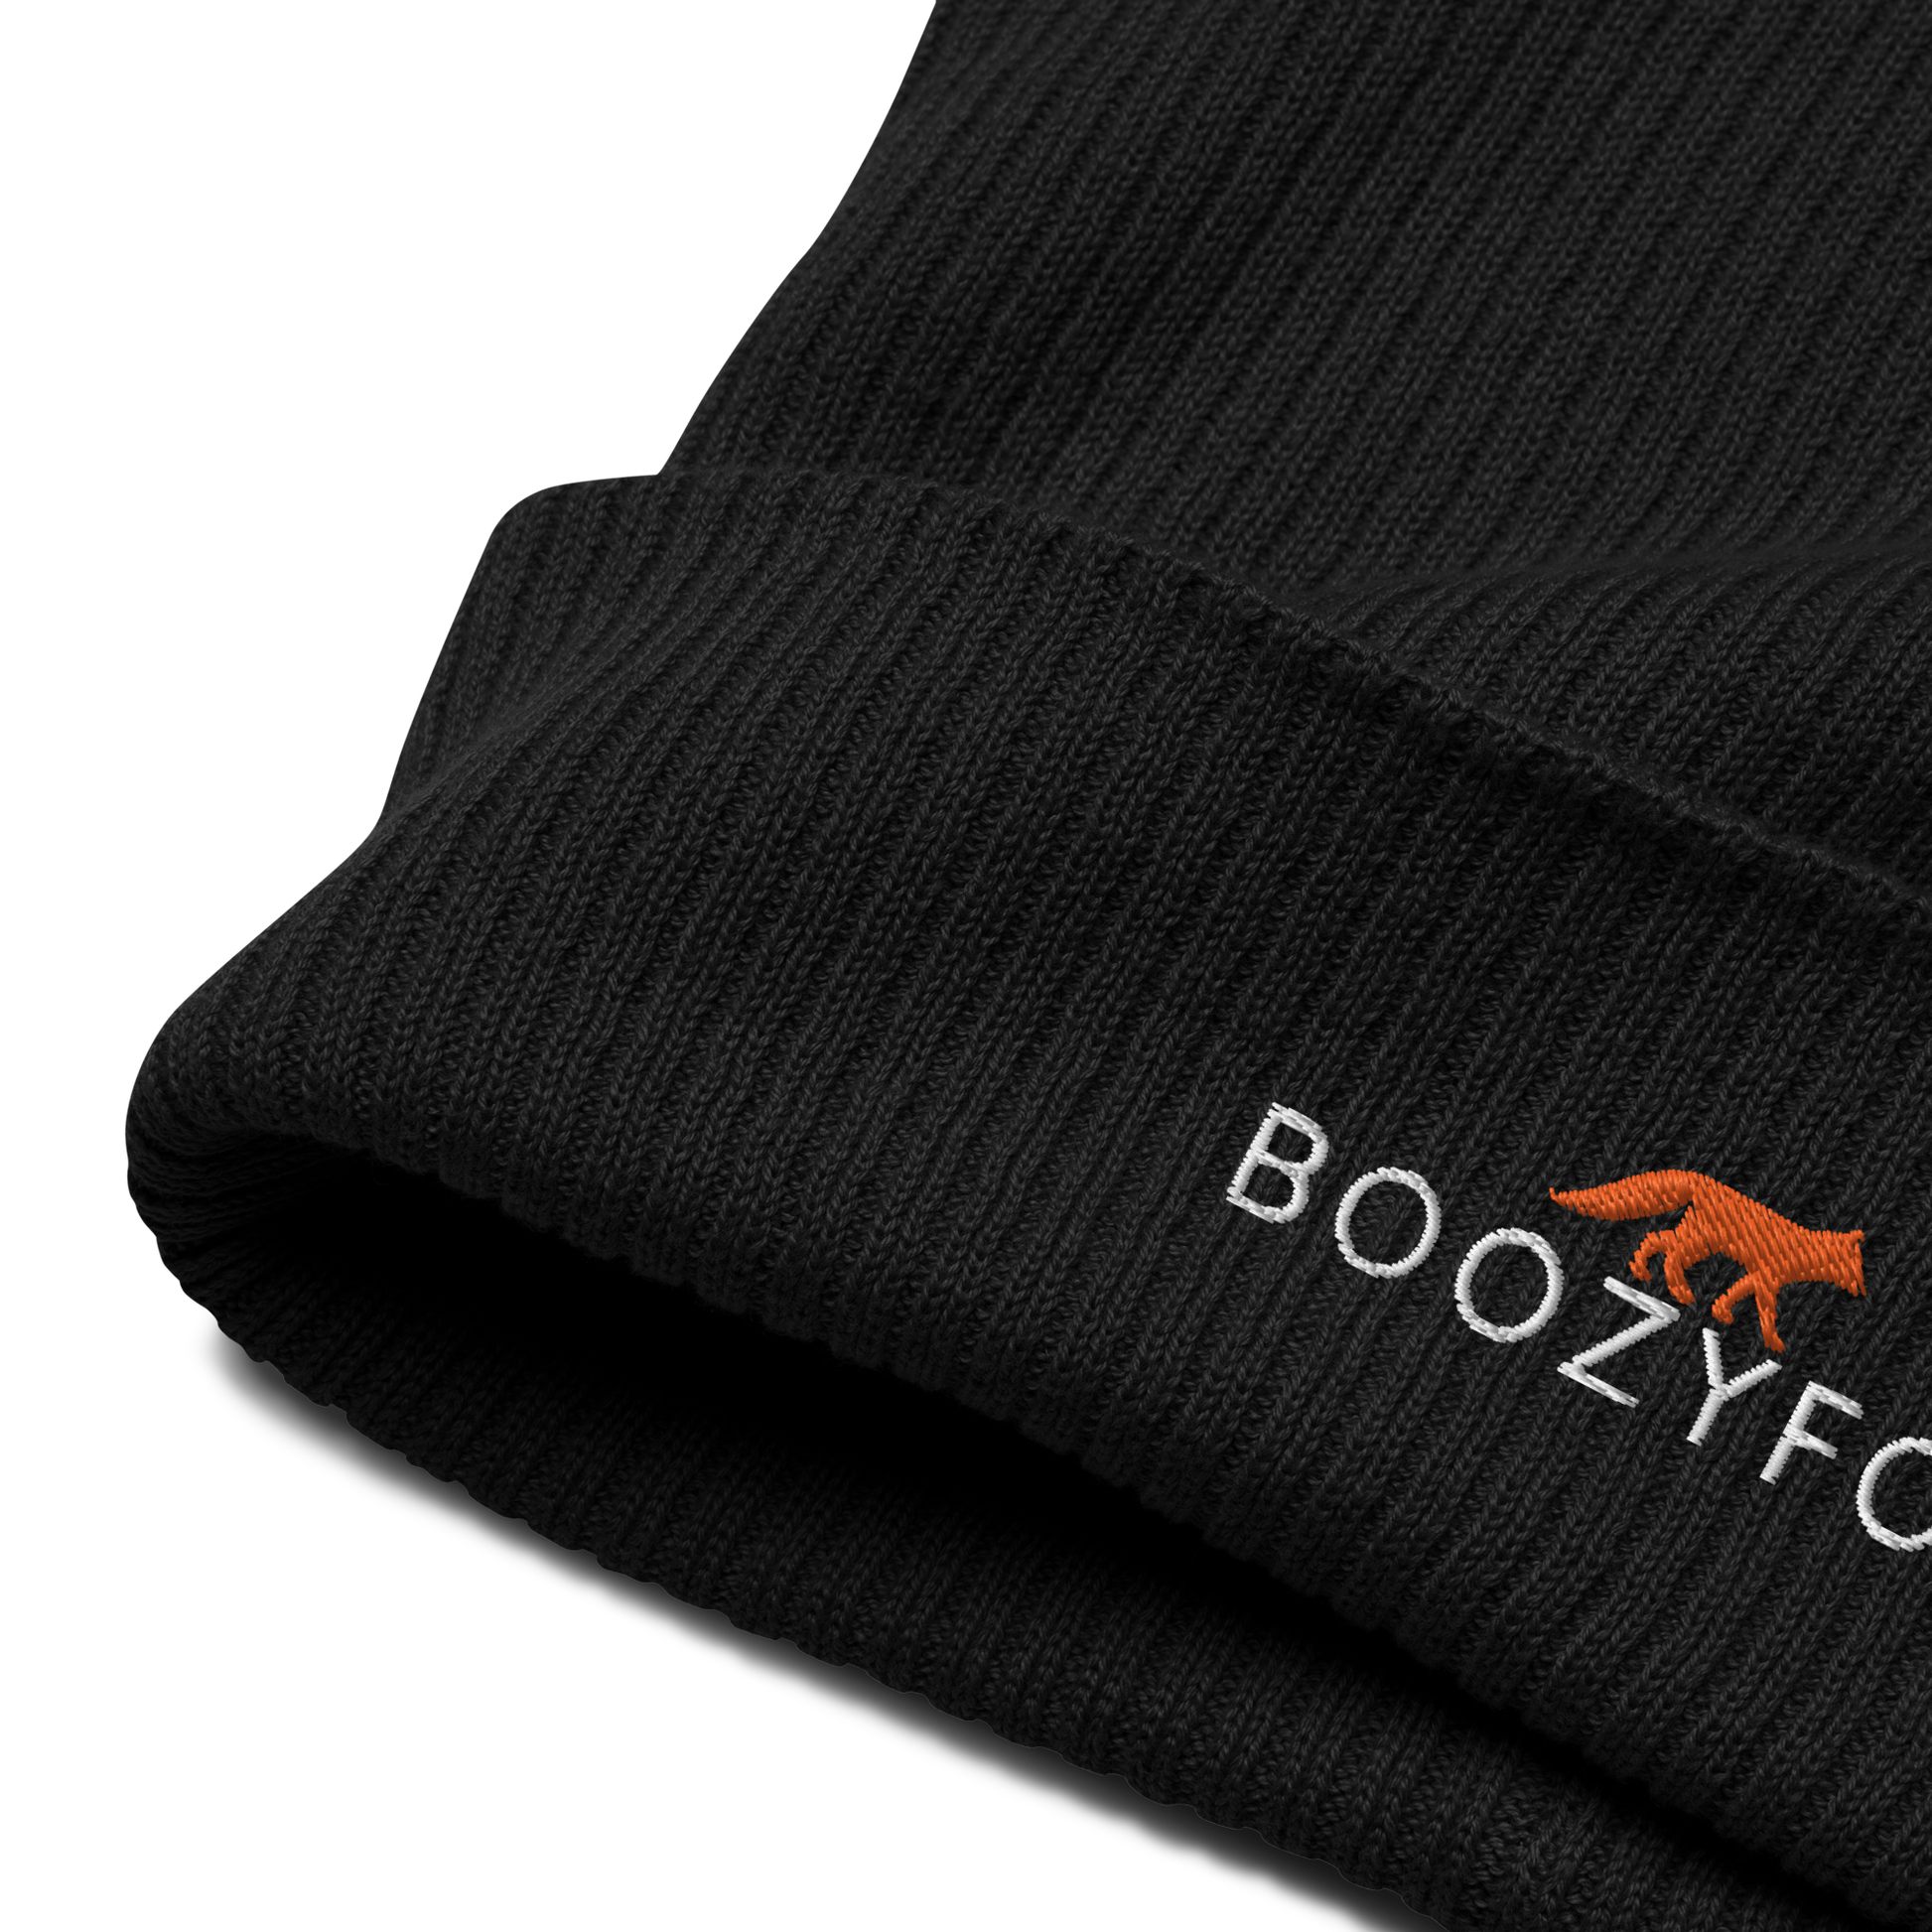 Front details of a Black Organic Ribbed Beanie With An Embroidered Boozy Fox Logo On Fold - Shop Organic Cotton Beanies Online - Boozy Fox